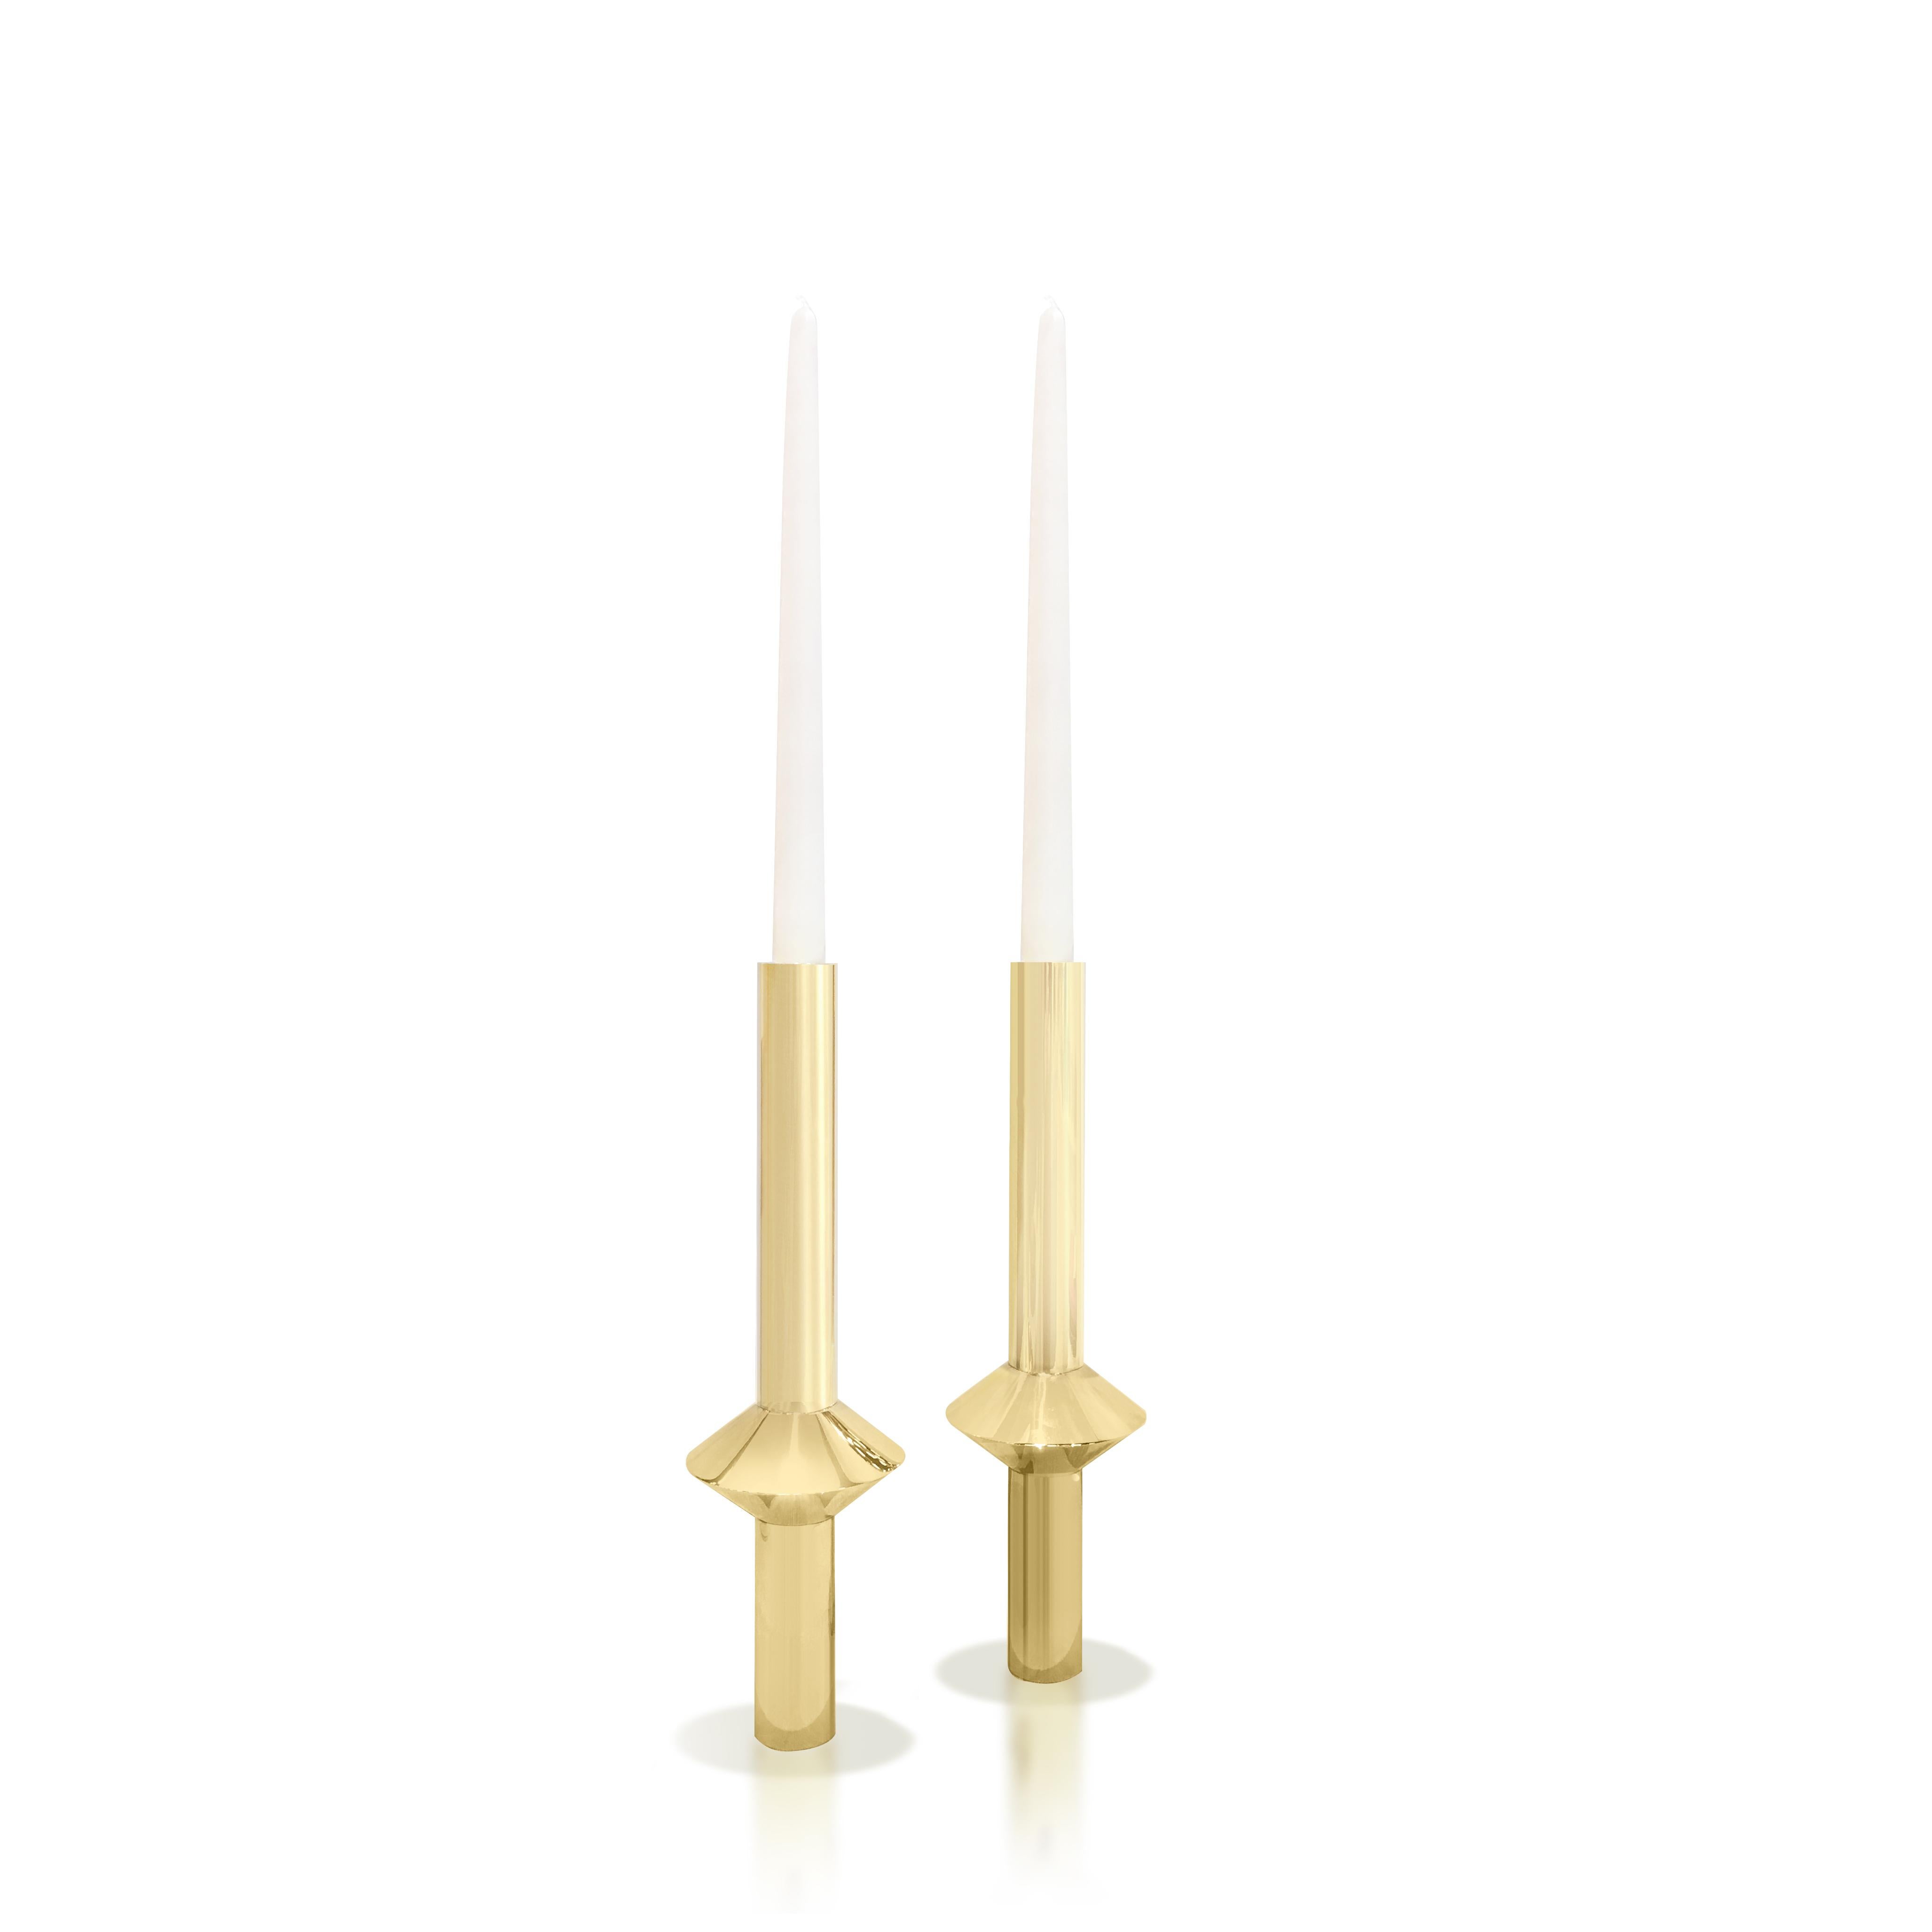 Part of Les Few's Annette collection, these contemporary, Minimalist candlesticks, are made by artisans in Sweden. They come in a polished or brushed finish.